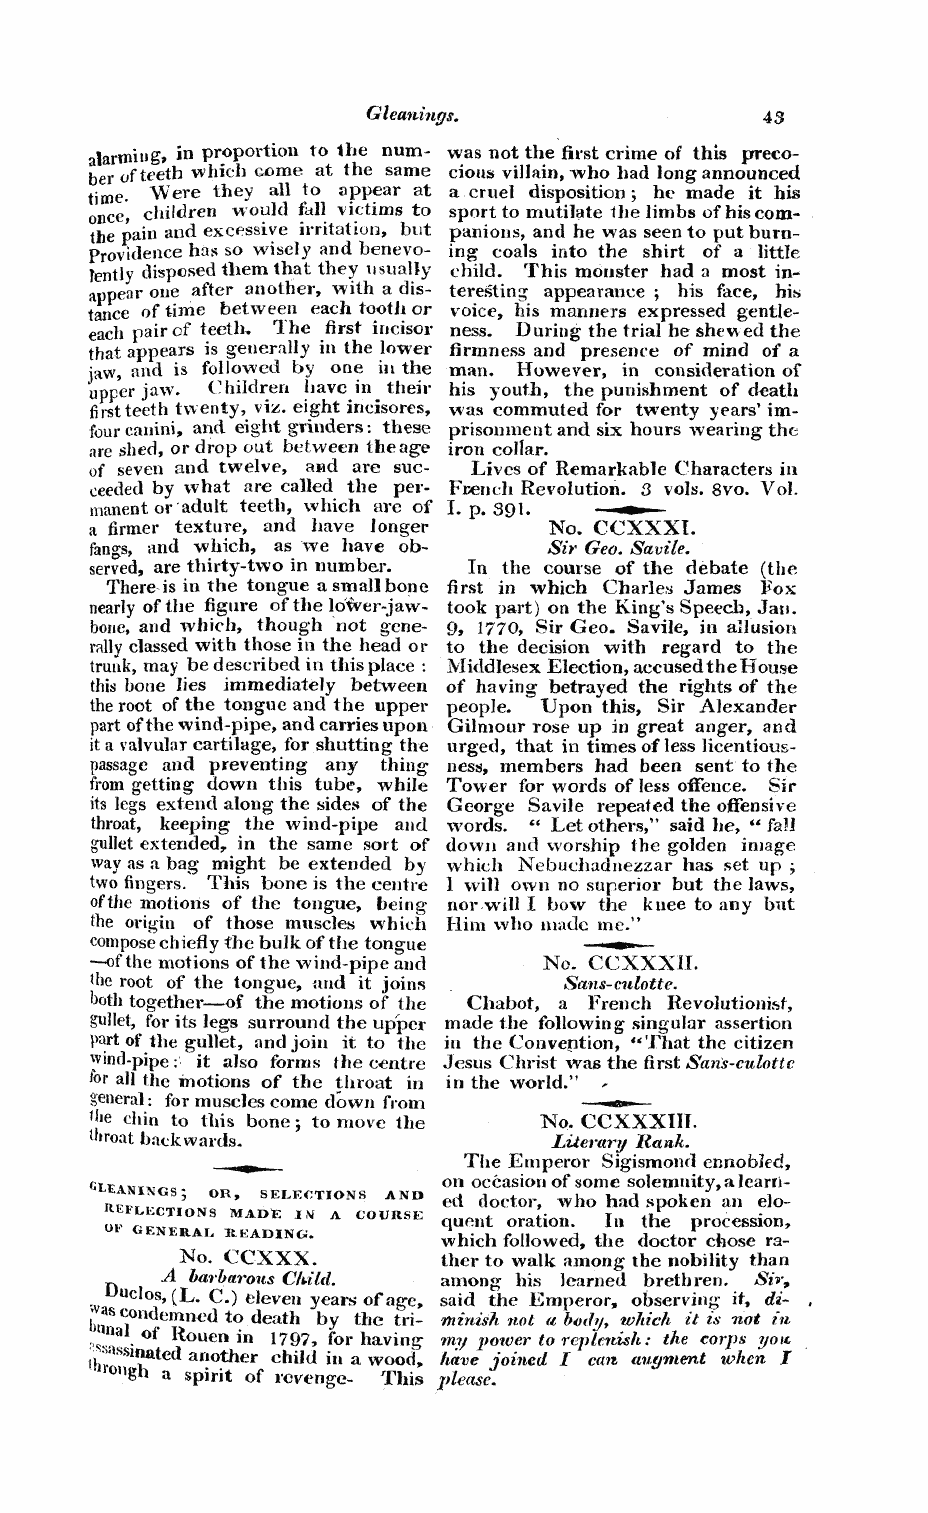 Monthly Repository (1806-1838) and Unitarian Chronicle (1832-1833): F Y, 1st edition: 37